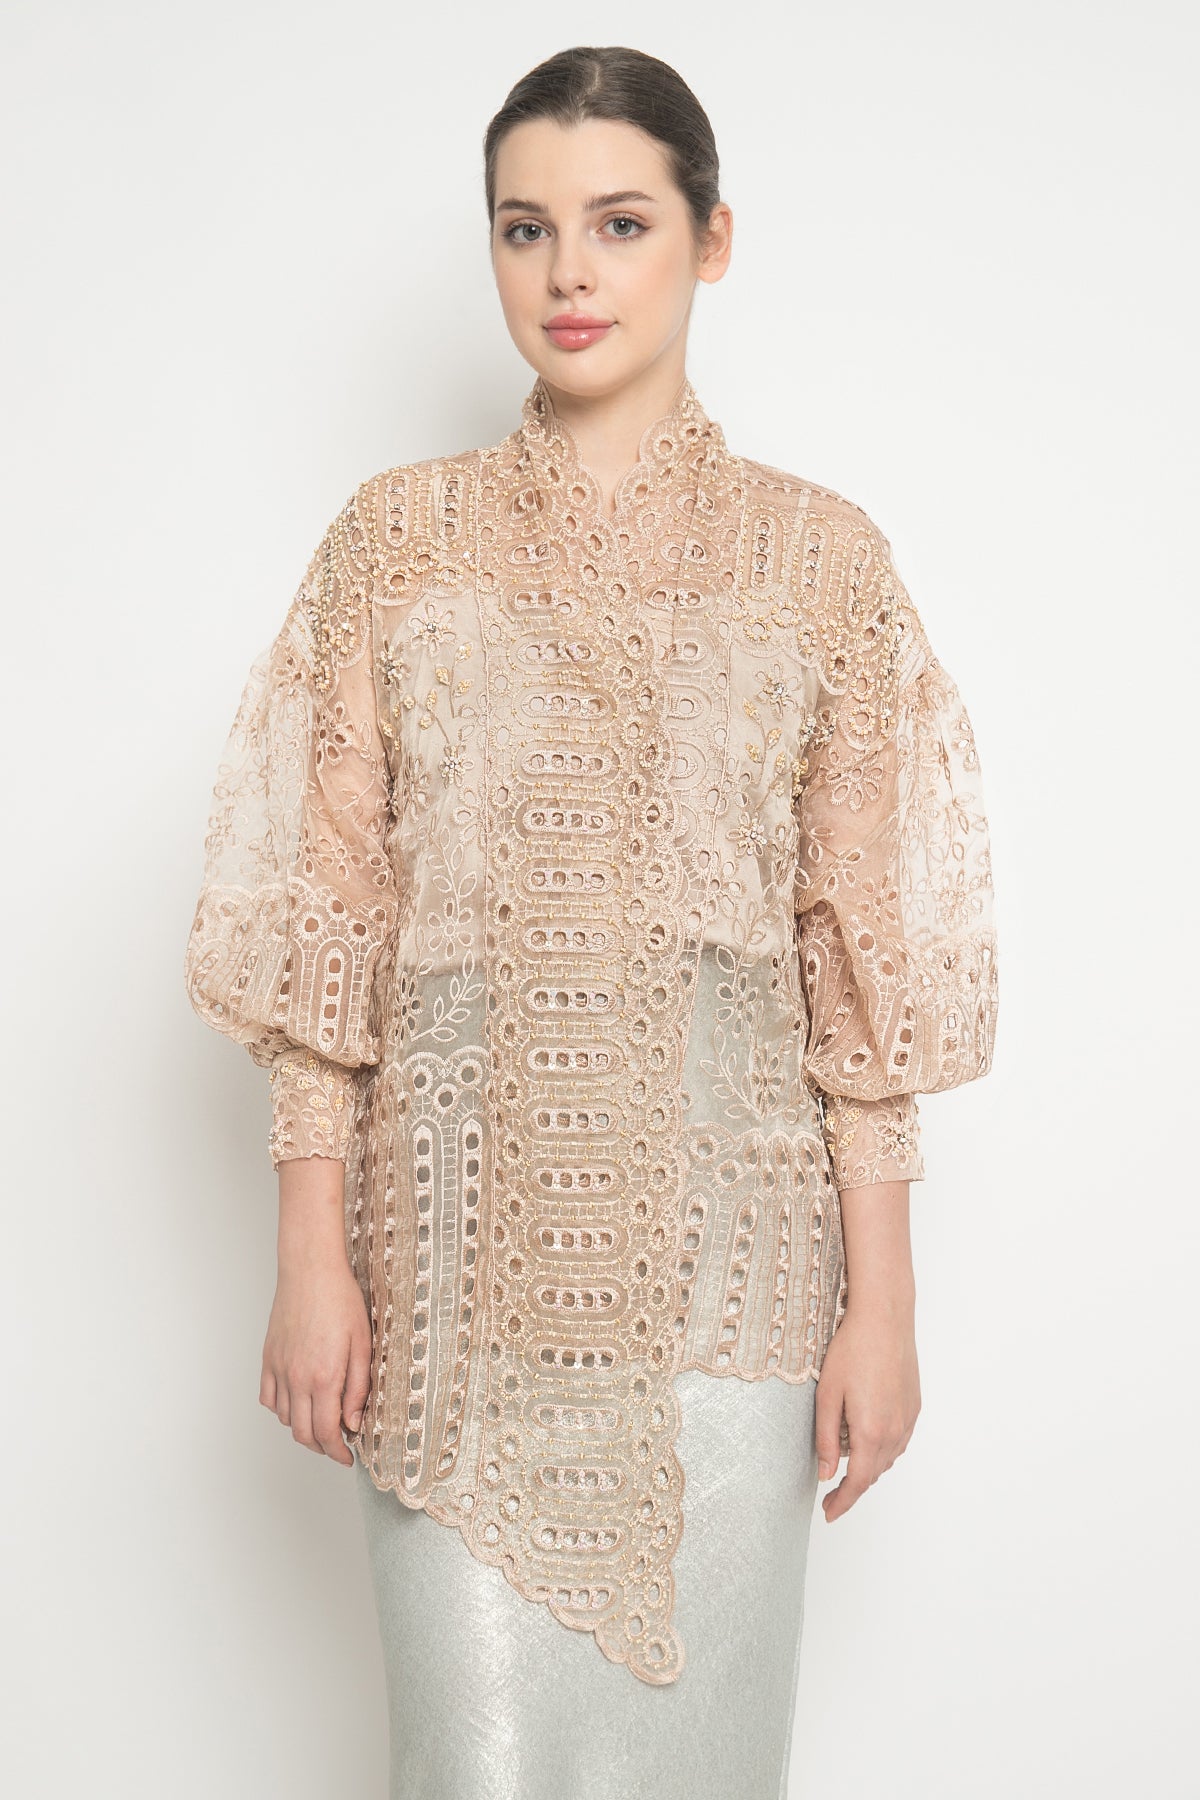 Alys Embellished Blouse in Peach